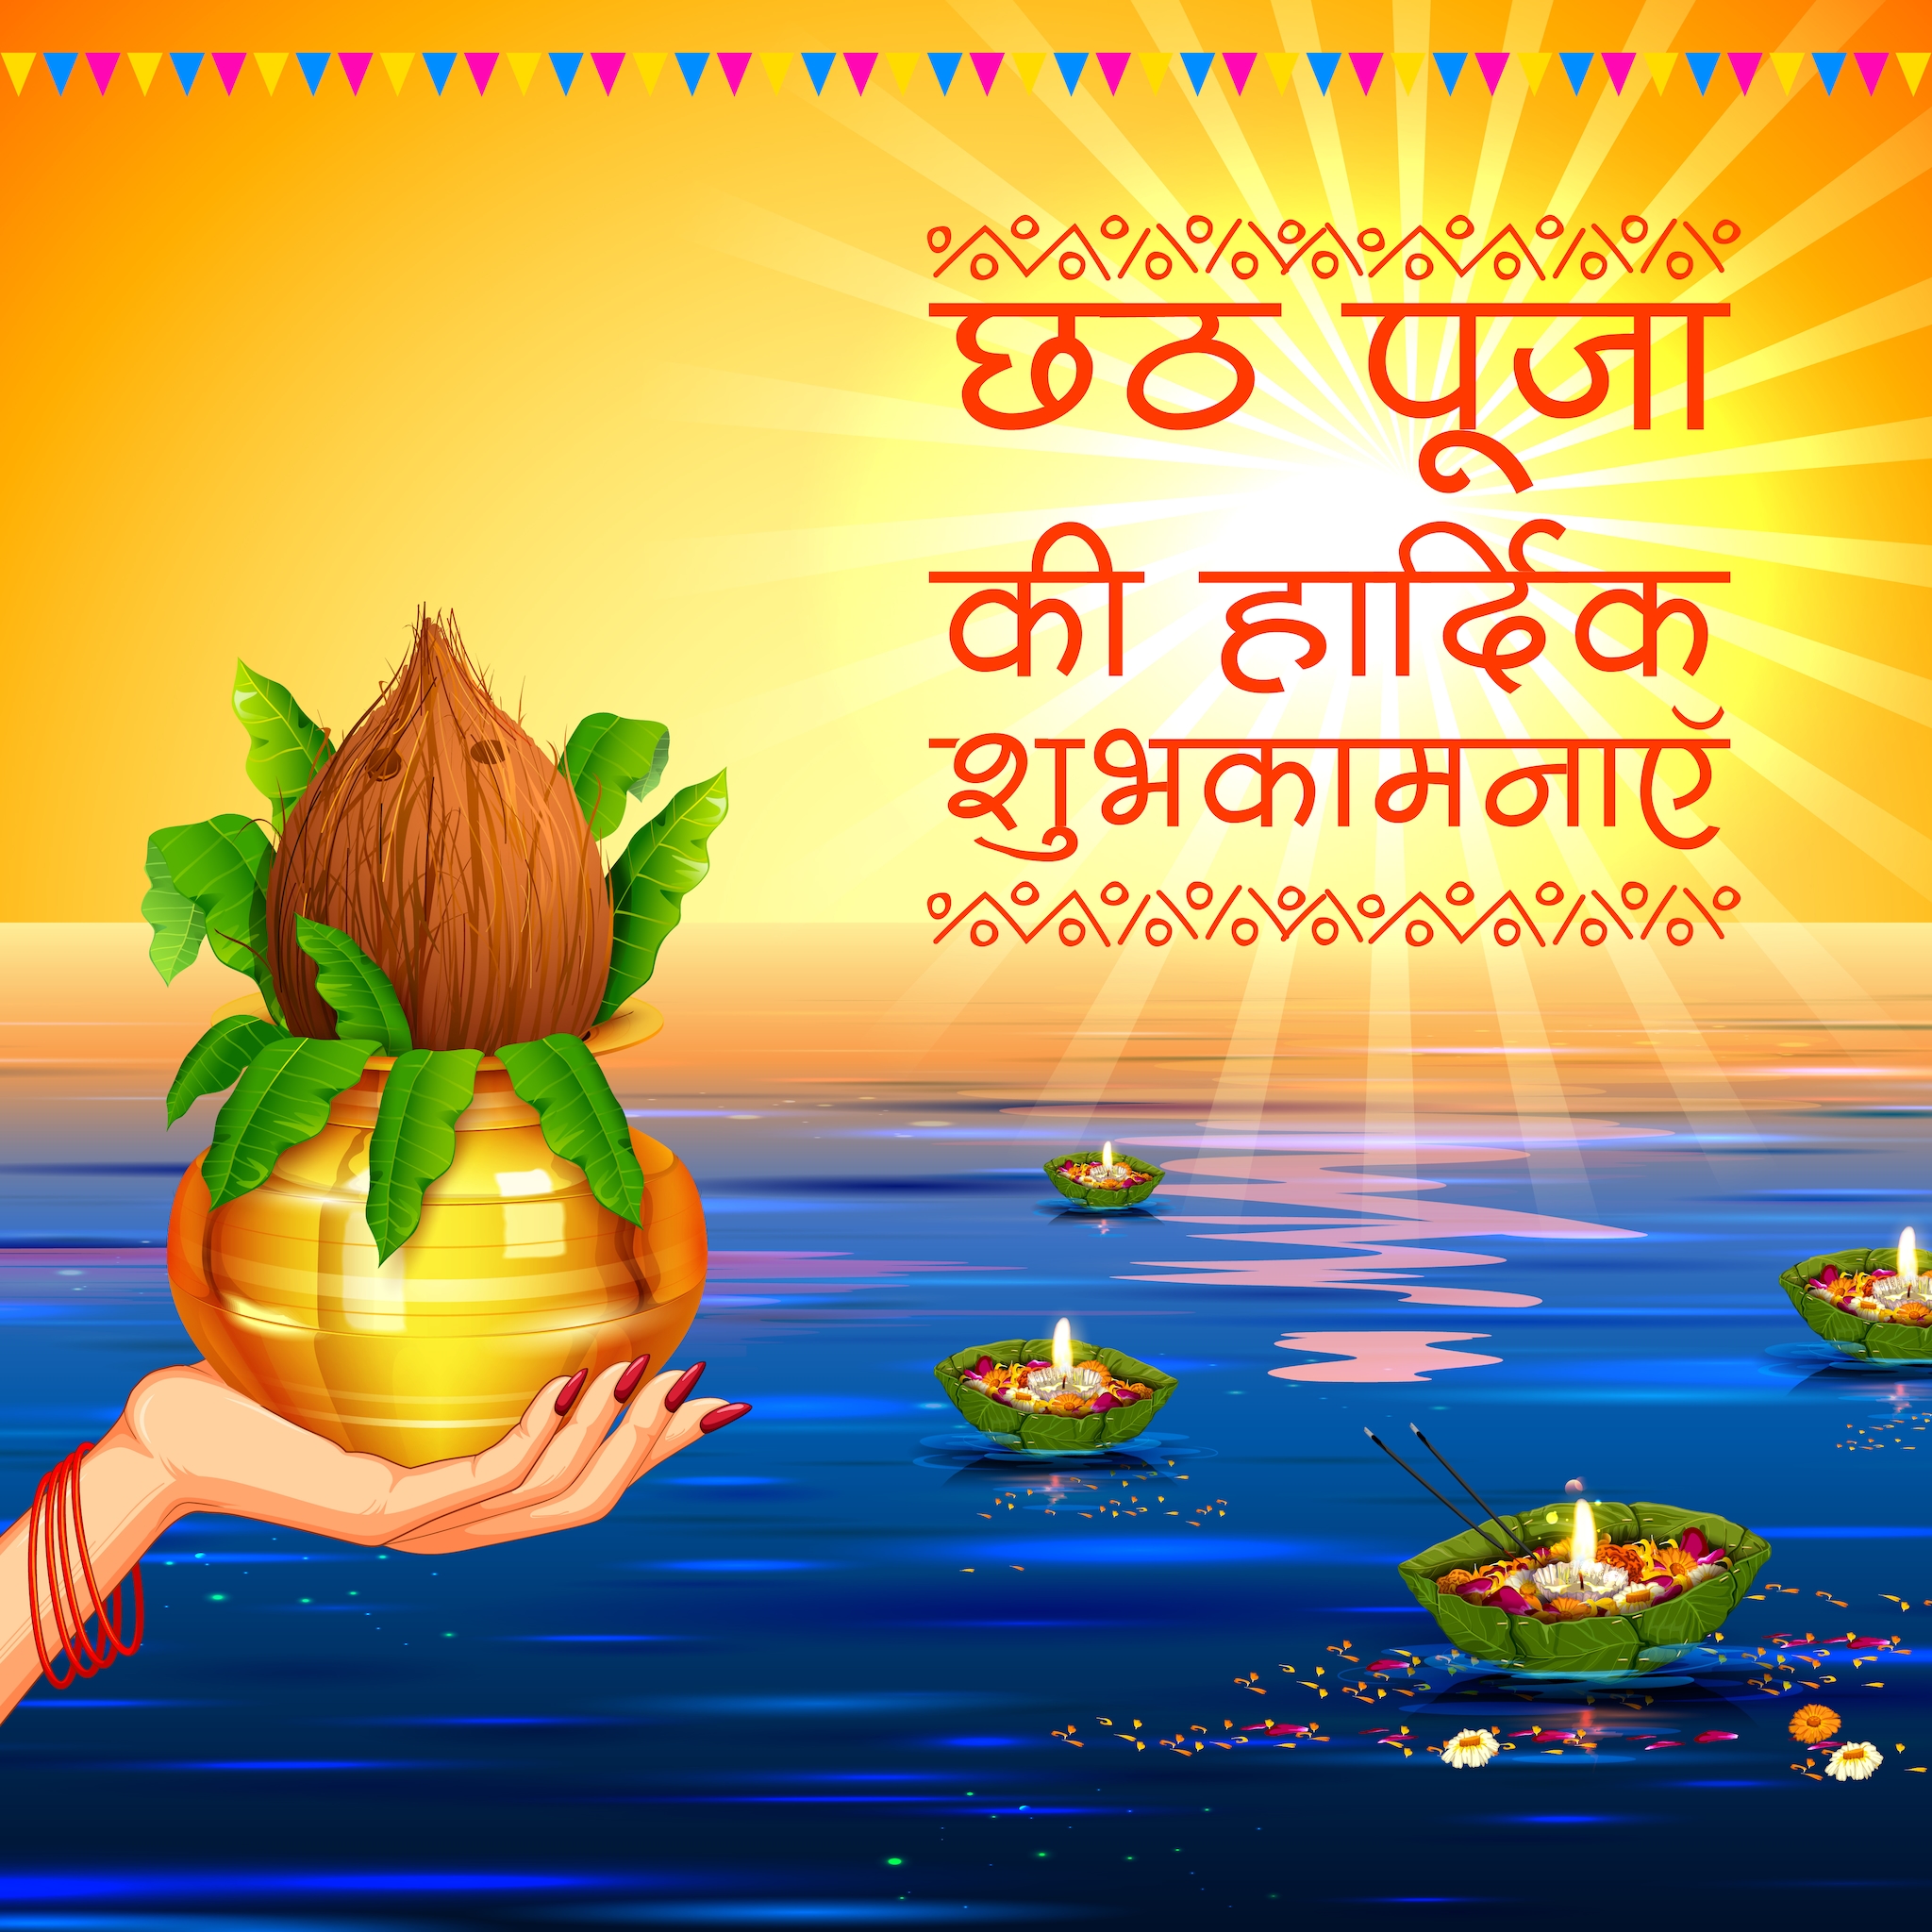 Happy Chhath Puja 2022: Best Wishes, messages, quotes, greetings, SMS, WhatsApp and Facebook status to share with your family and friends. (Image: Shutterstock)   